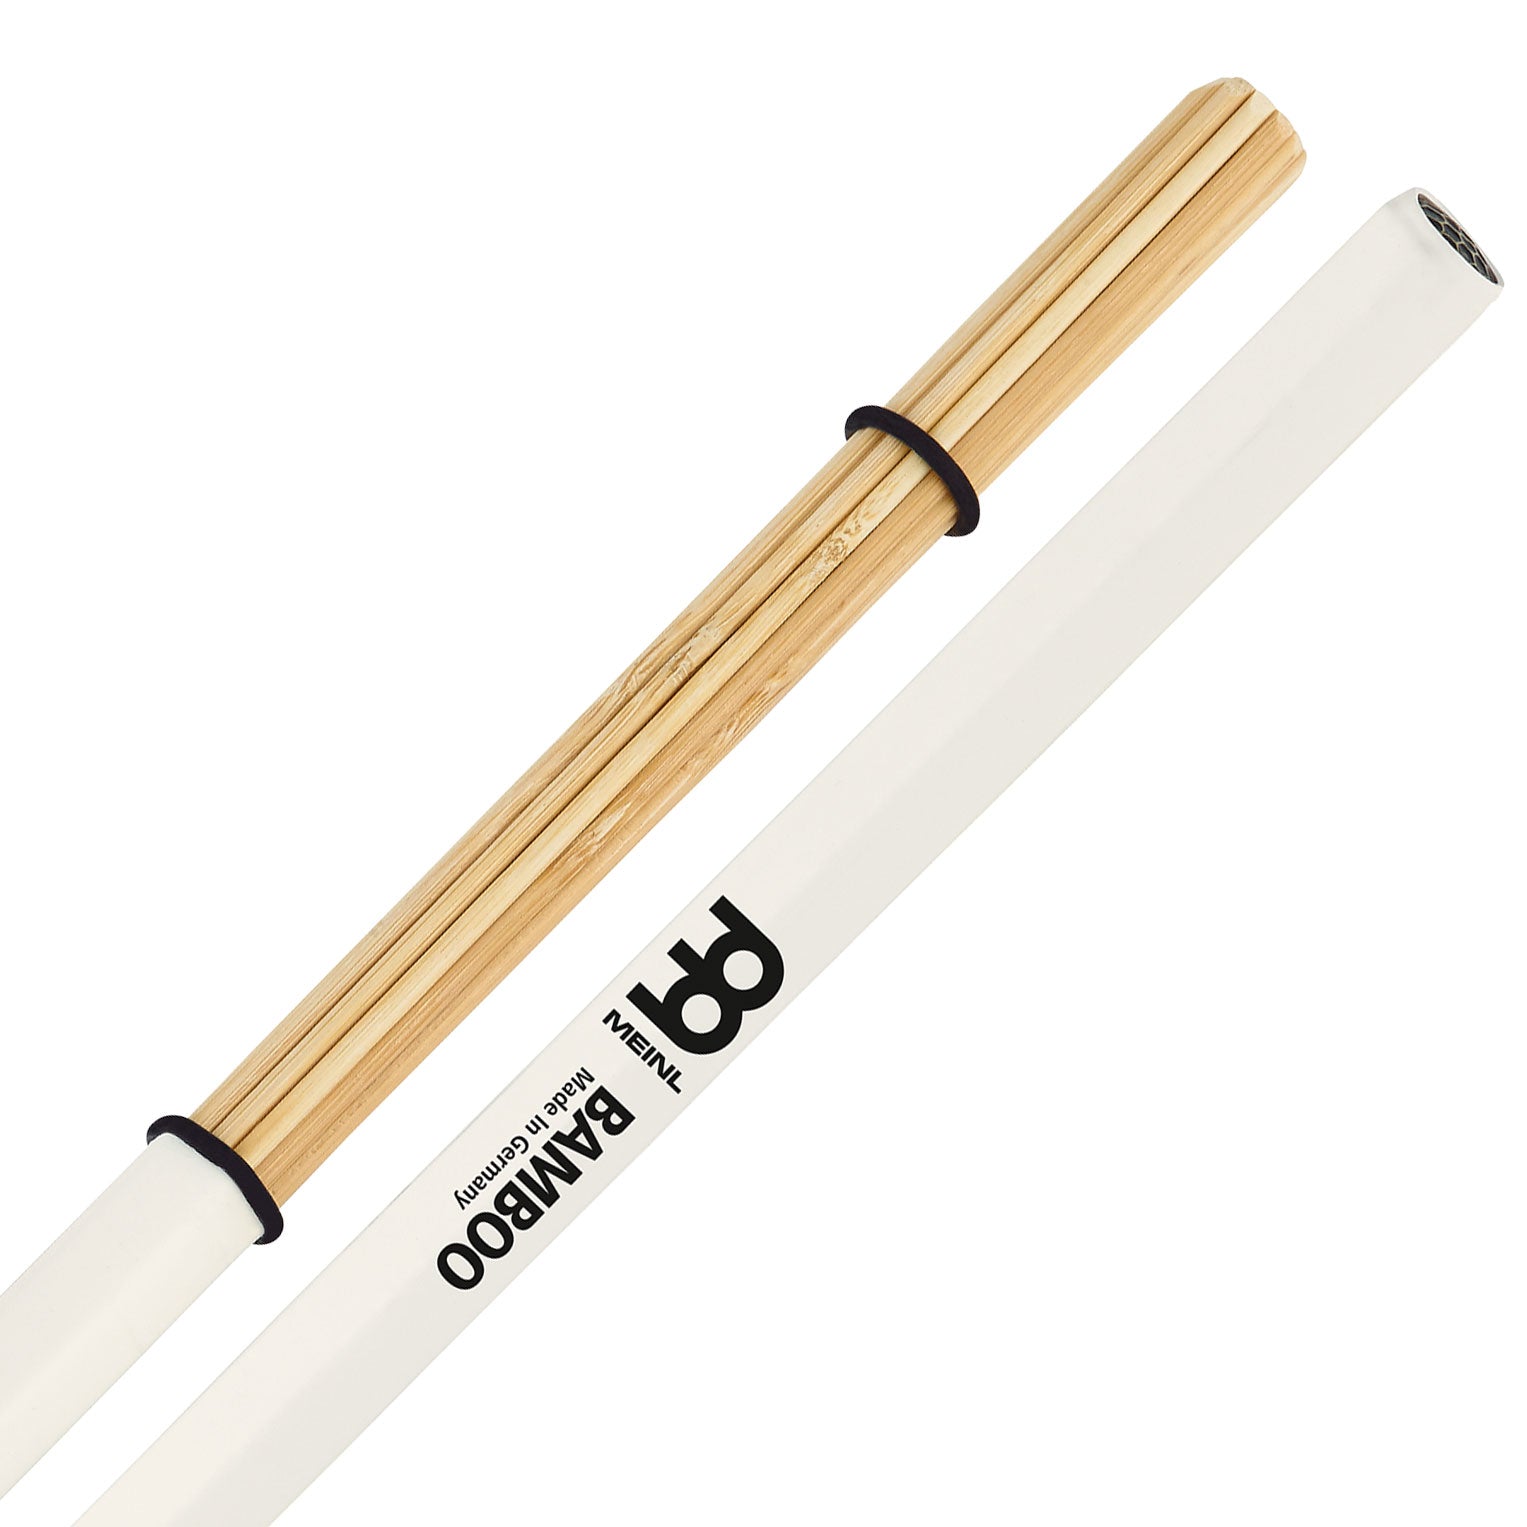 Meinl Bamboo Multi-Sticks With Extra-Long Grip